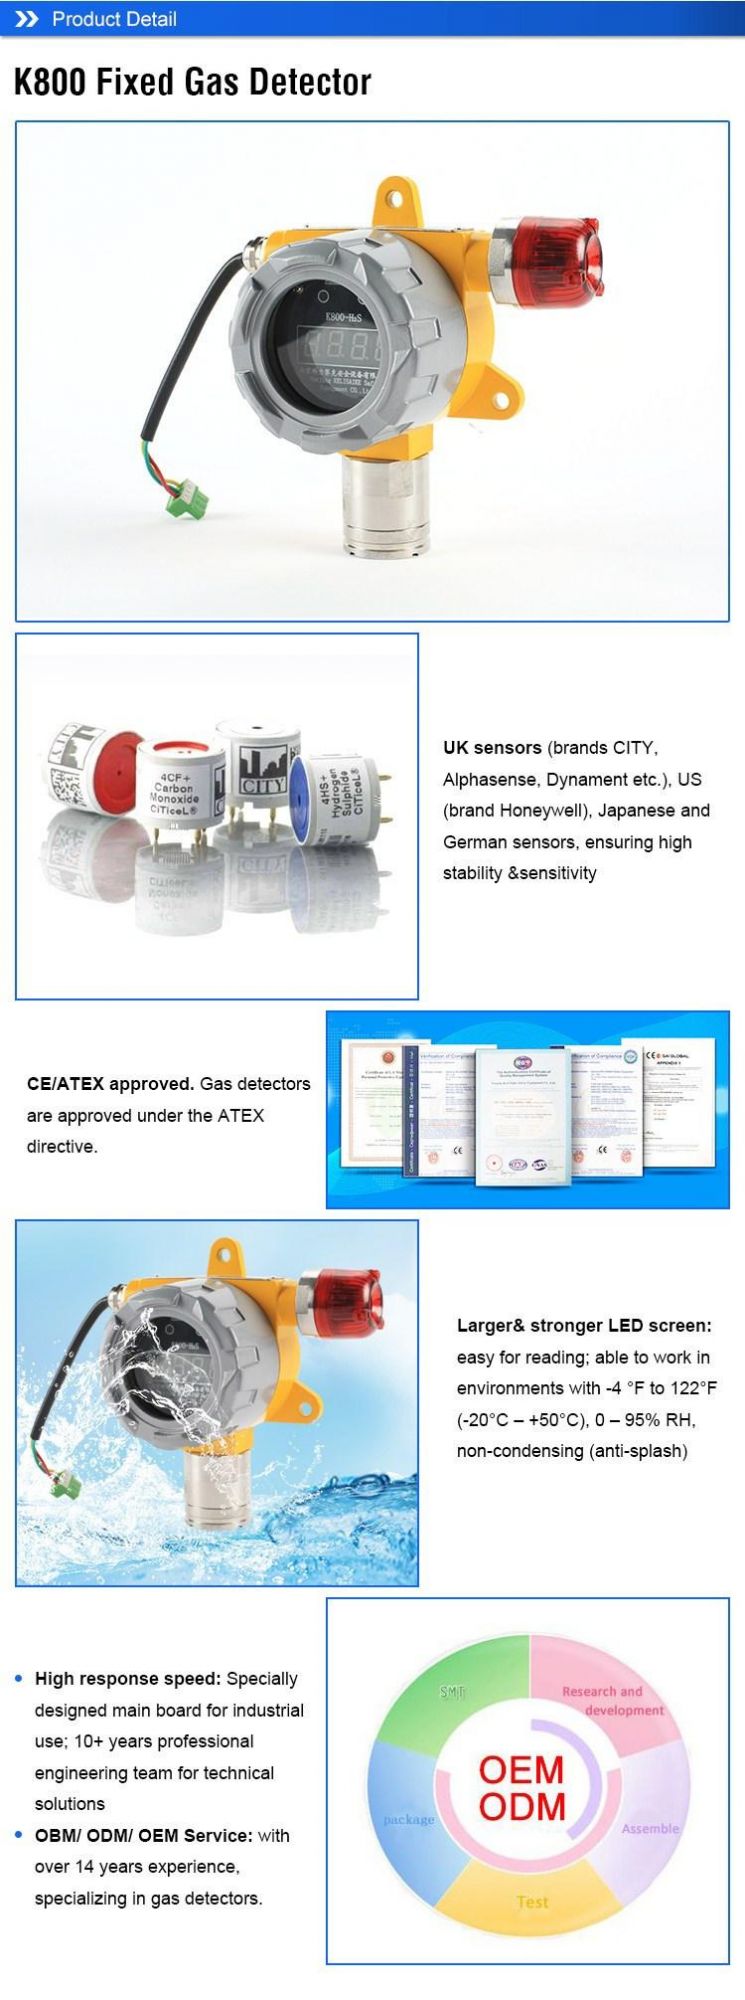 Fixed in-Built Alarm Nh3 Gas Detector for Industrial Environment Use